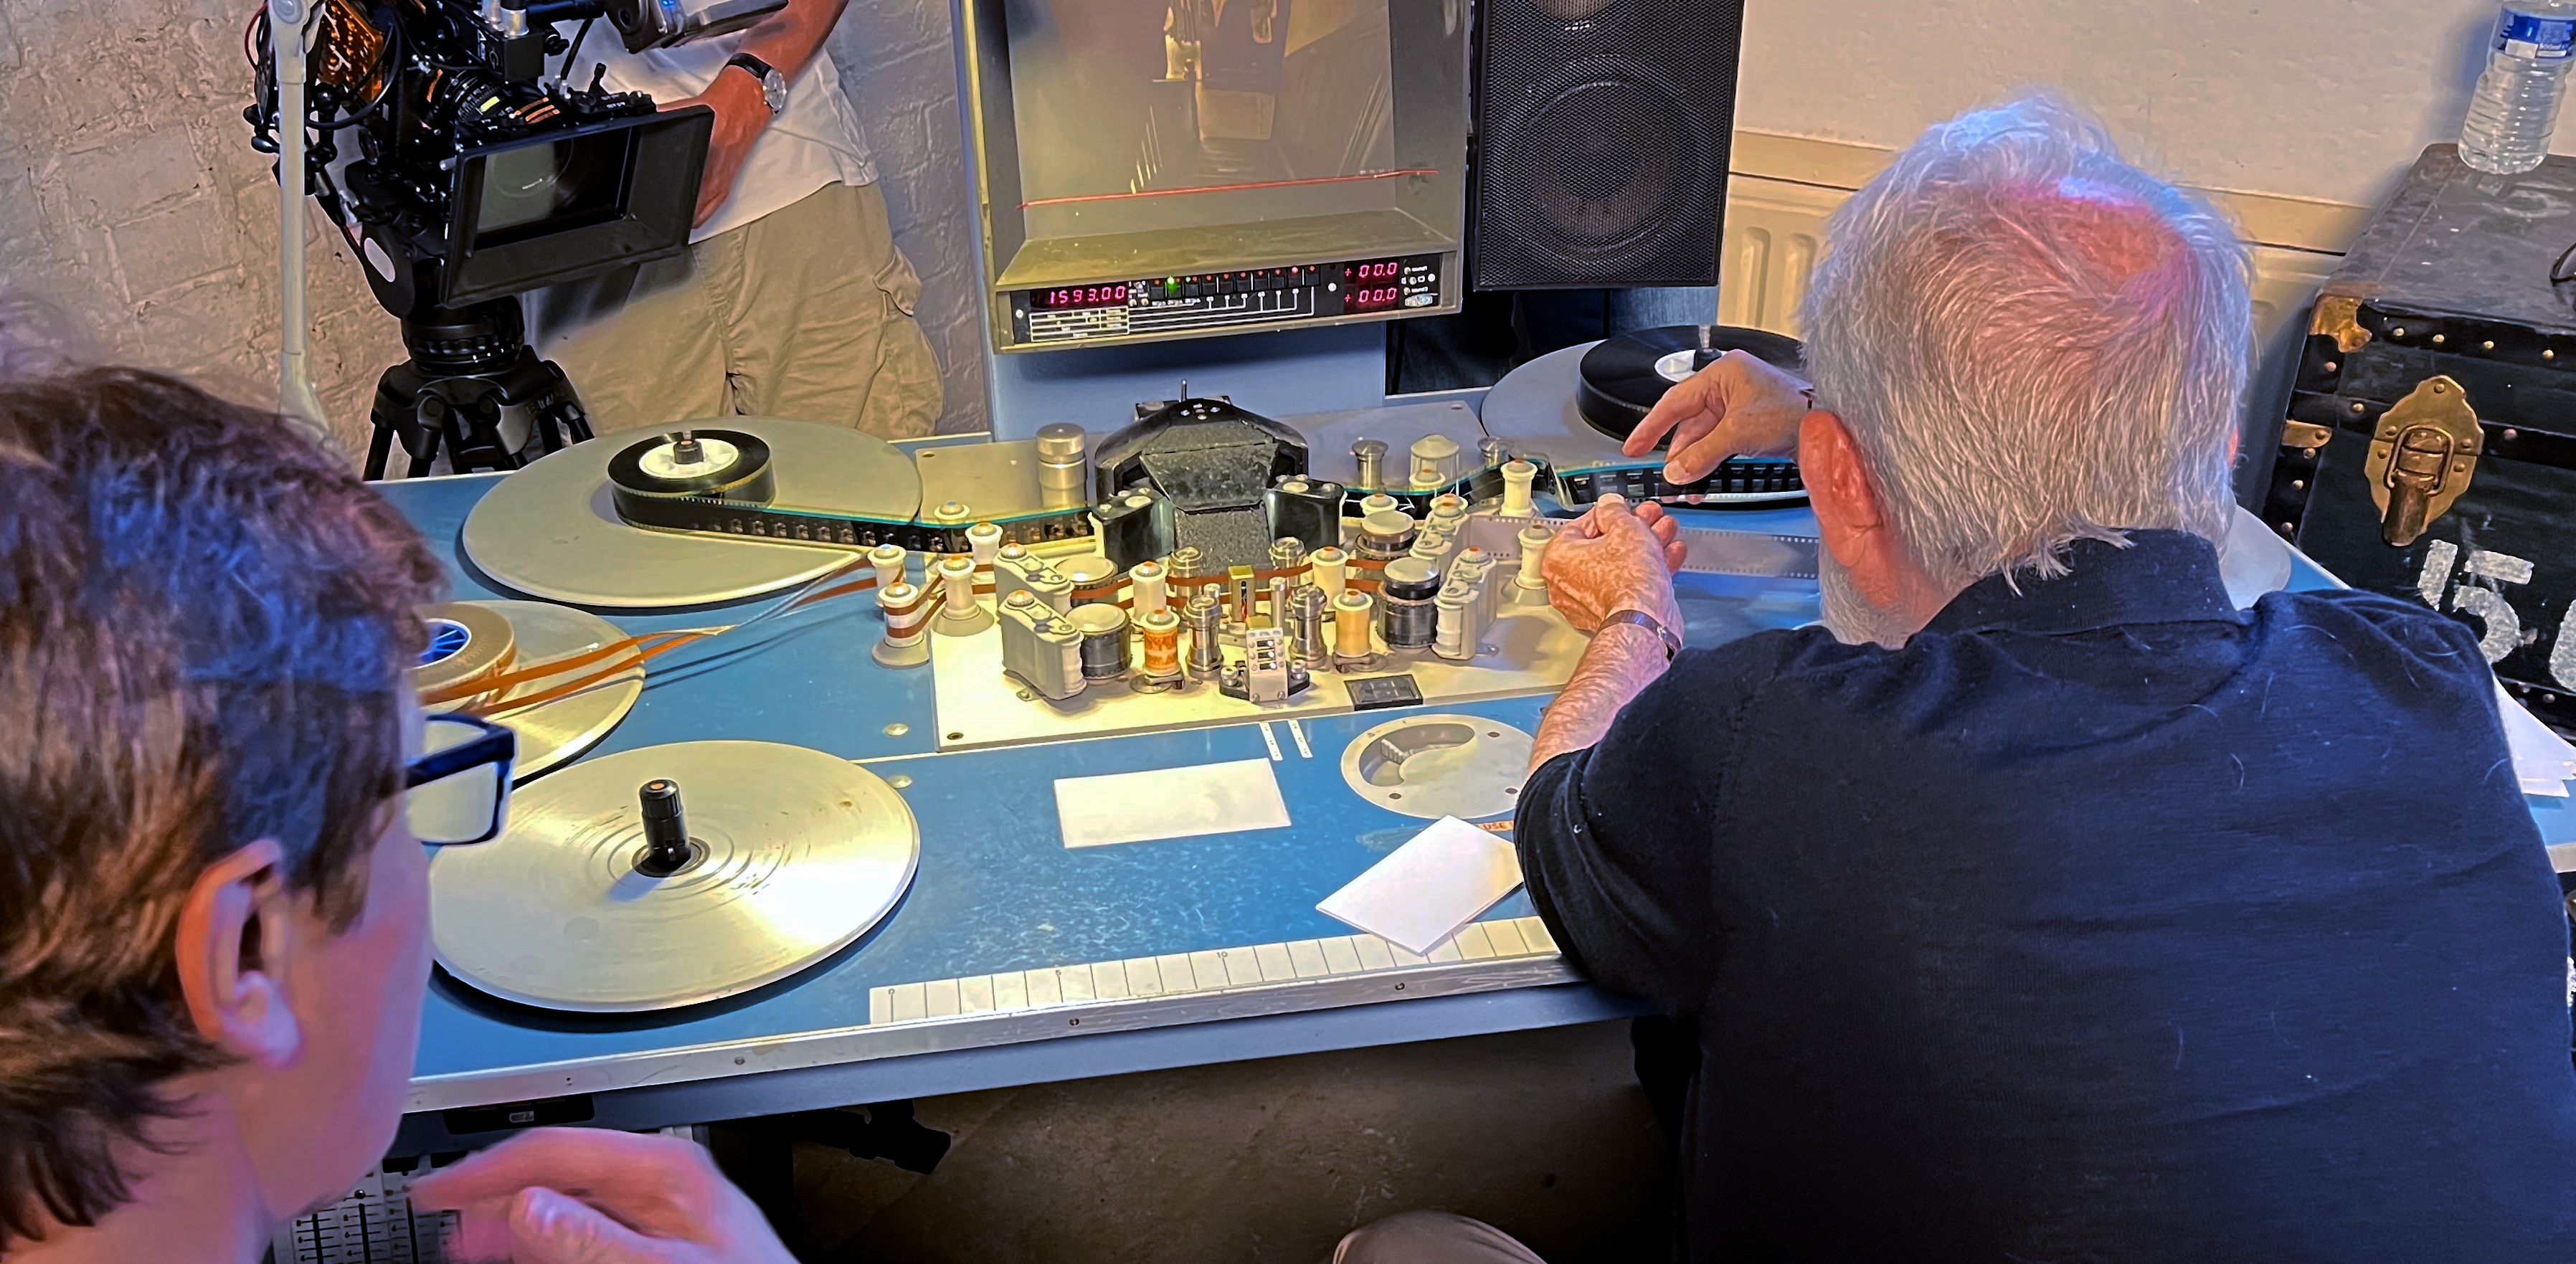 Her Name Was Moviola - An interview with Walter Murch about film editing with the Moviola 9